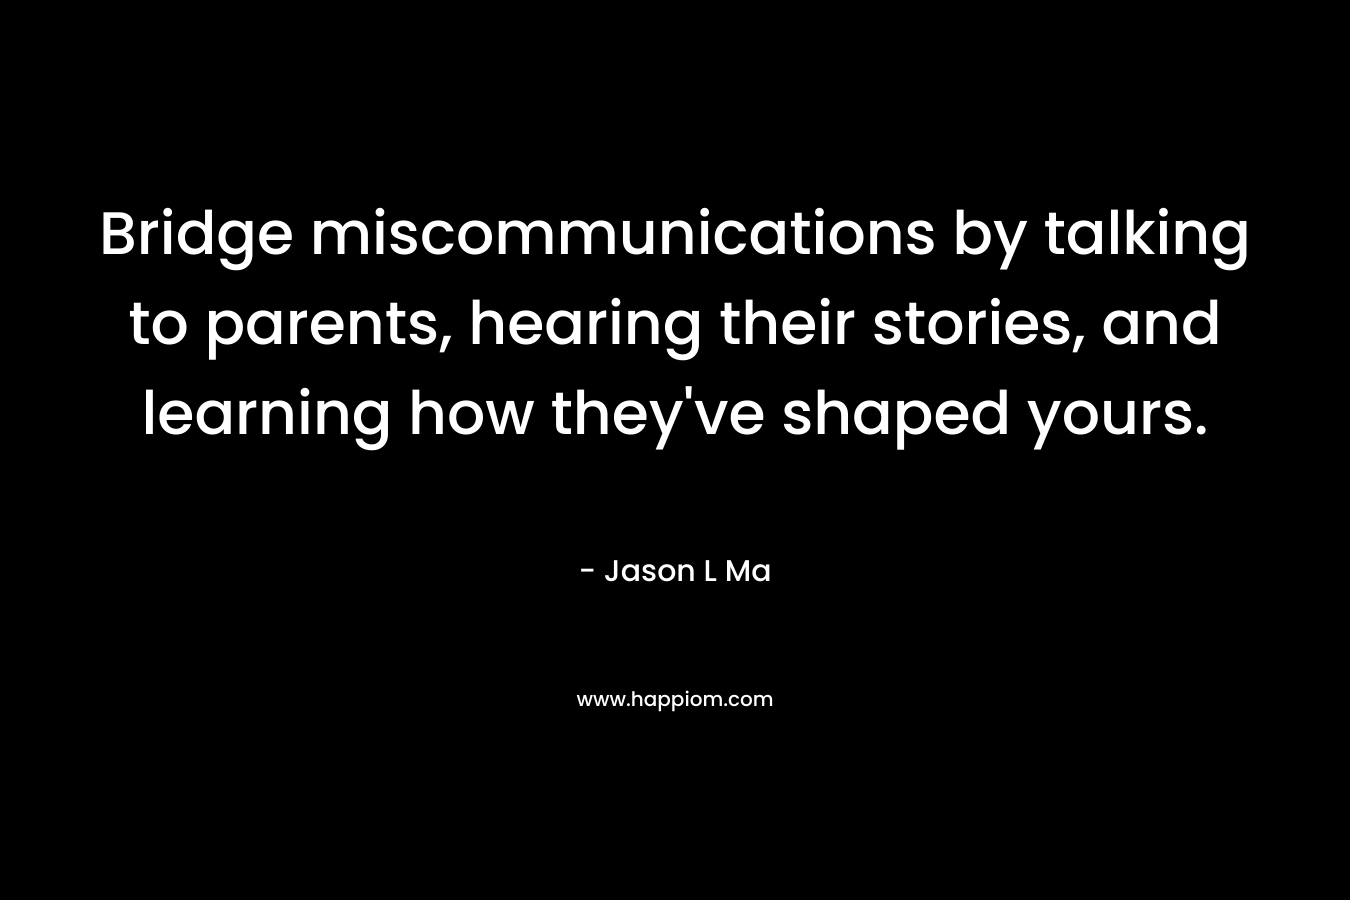 Bridge miscommunications by talking to parents, hearing their stories, and learning how they've shaped yours.